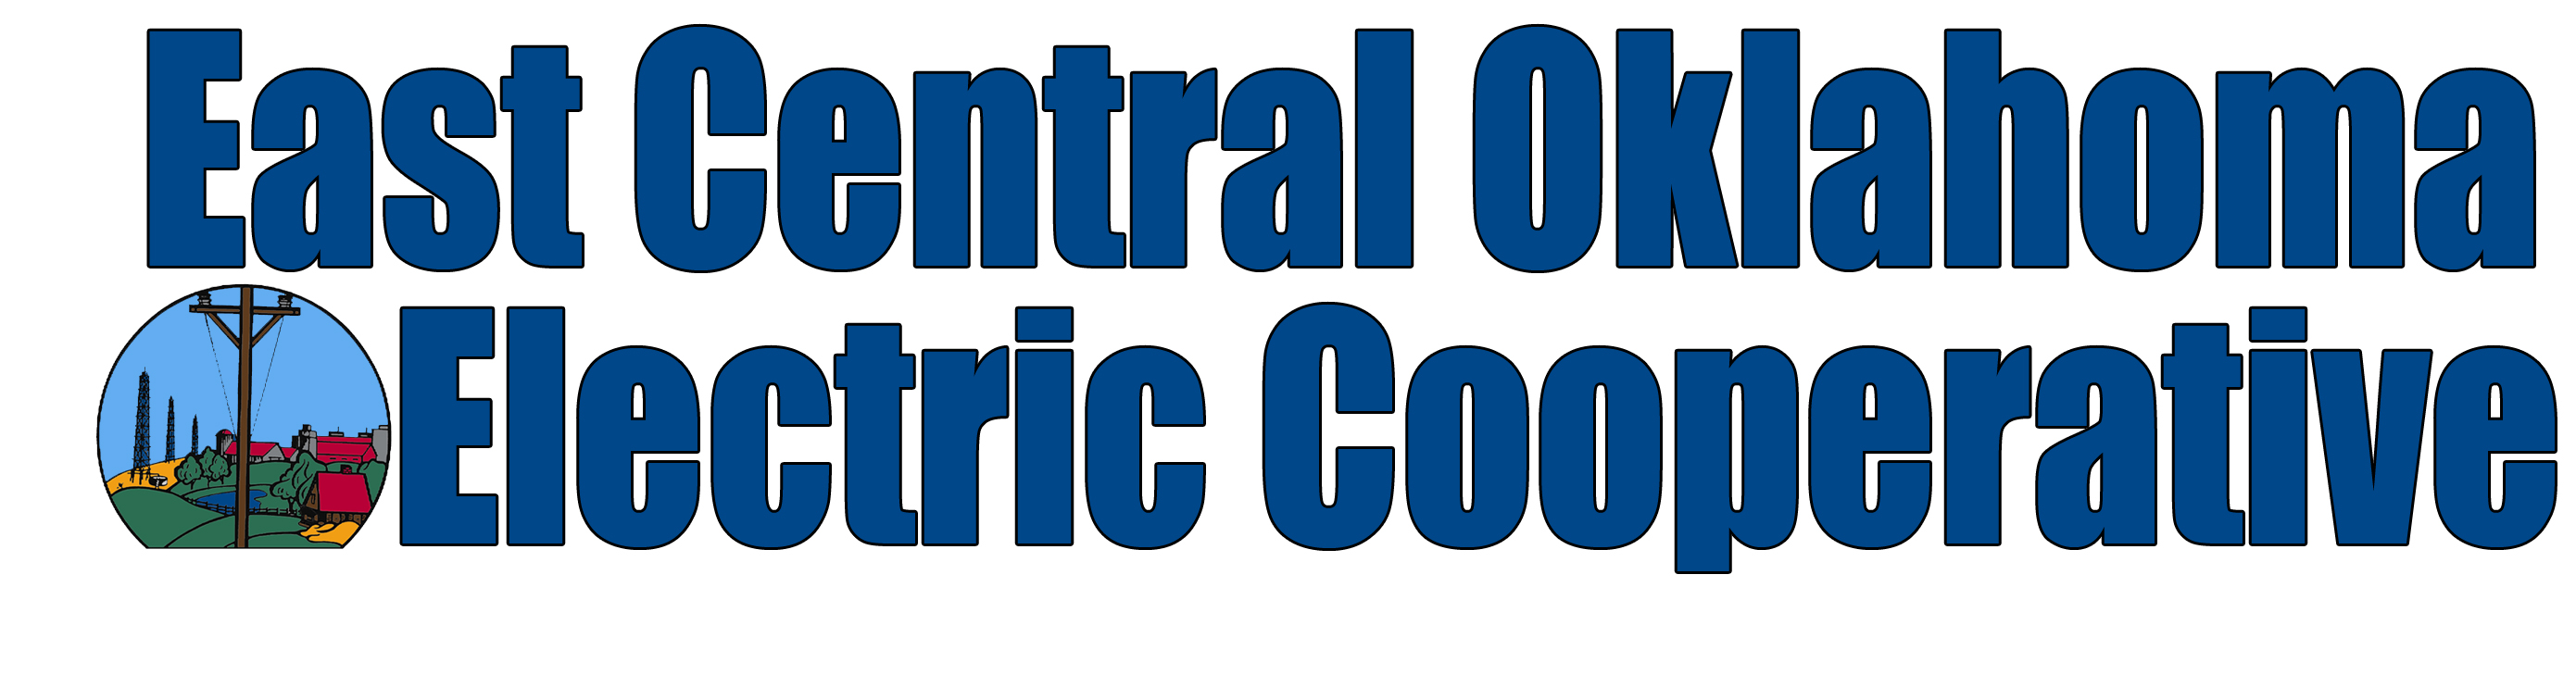 east-central-iowa-rural-electric-cooperative